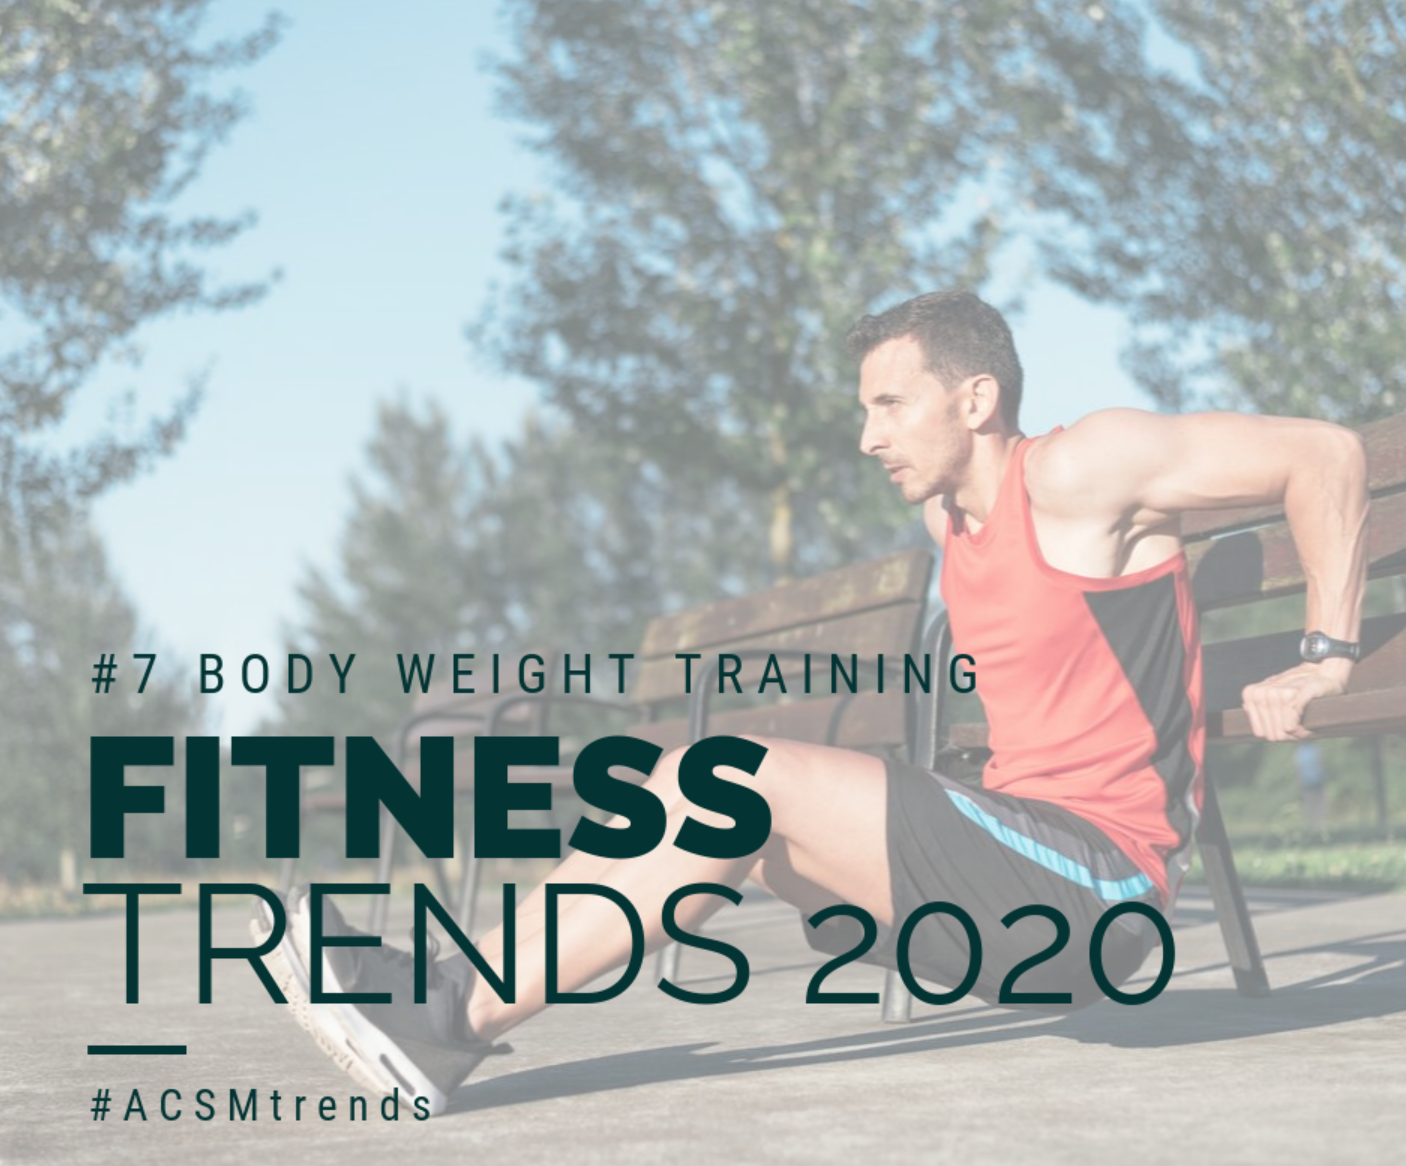 Top 20 Fitness Trends of 2020